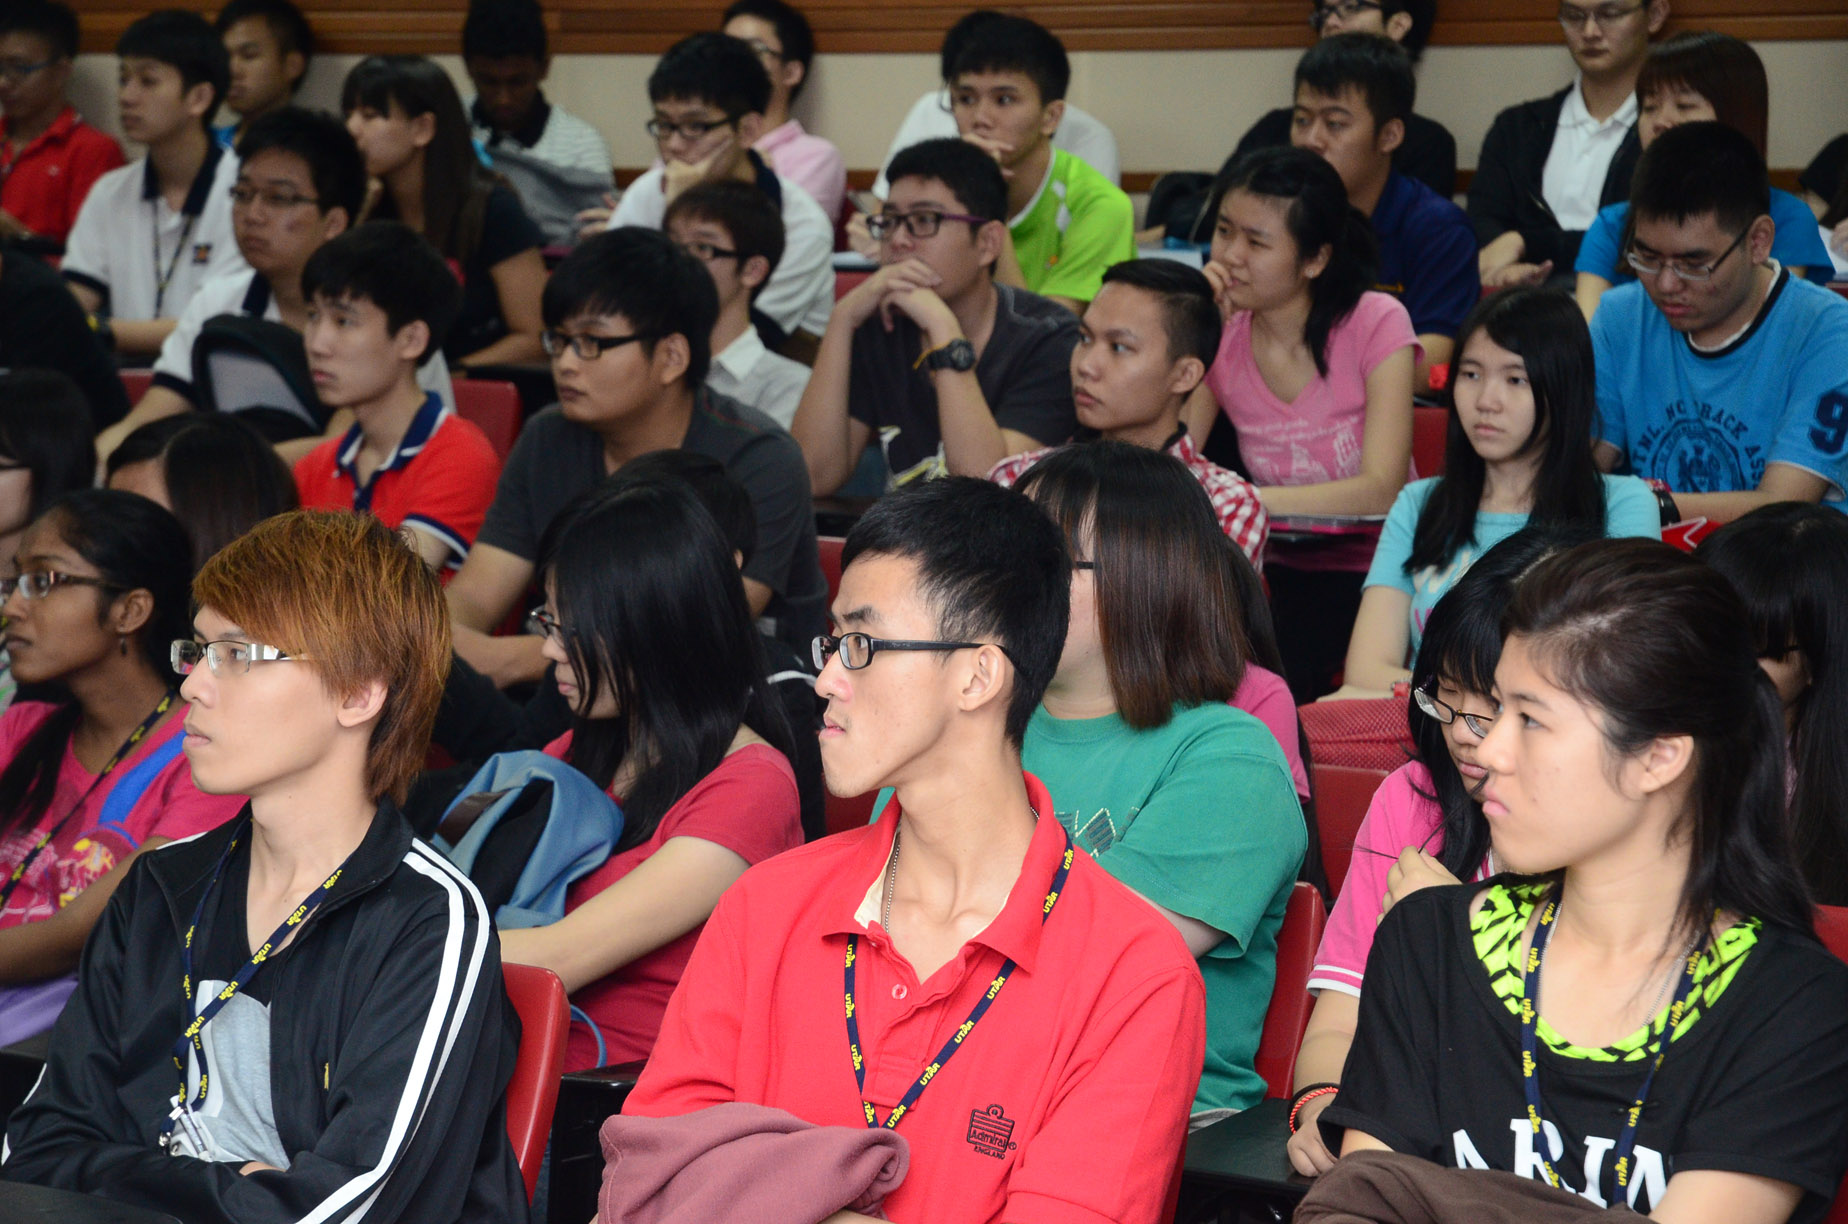 Students listening attentively to the talk